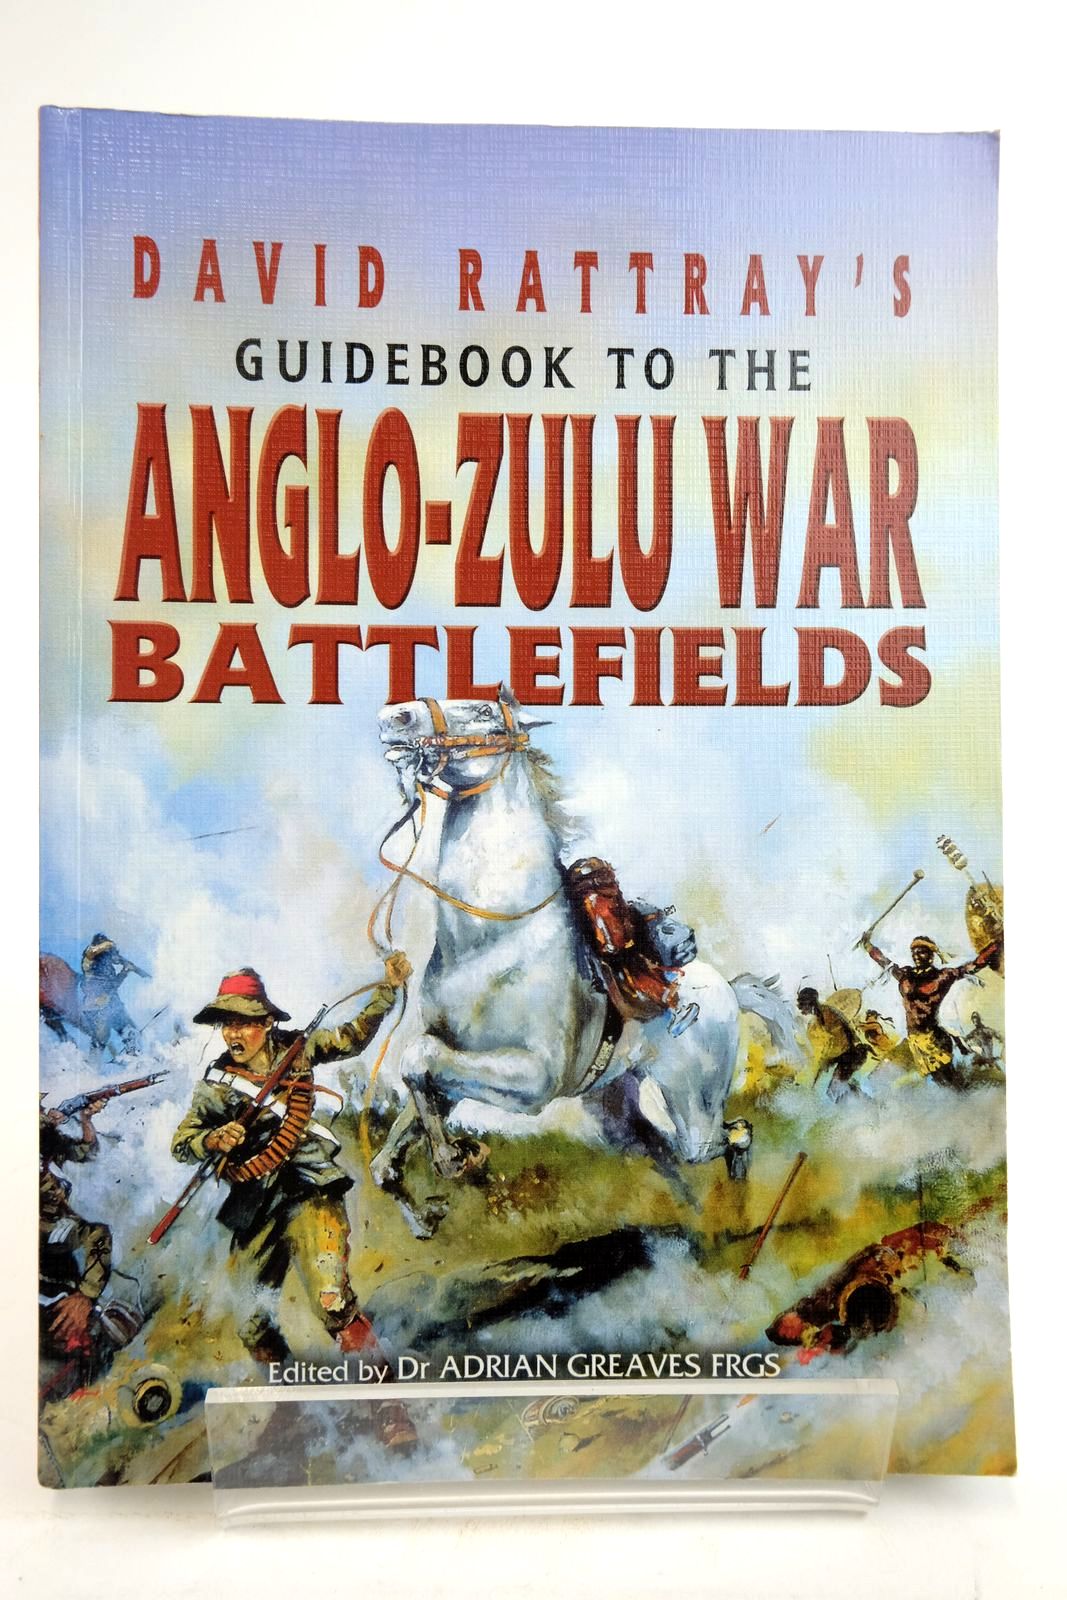 Photo of DAVID RATTRAY'S GUIDEBOOK TO THE ANGLO-ZULU WAR BATTLEFIELDS- Stock Number: 2136594